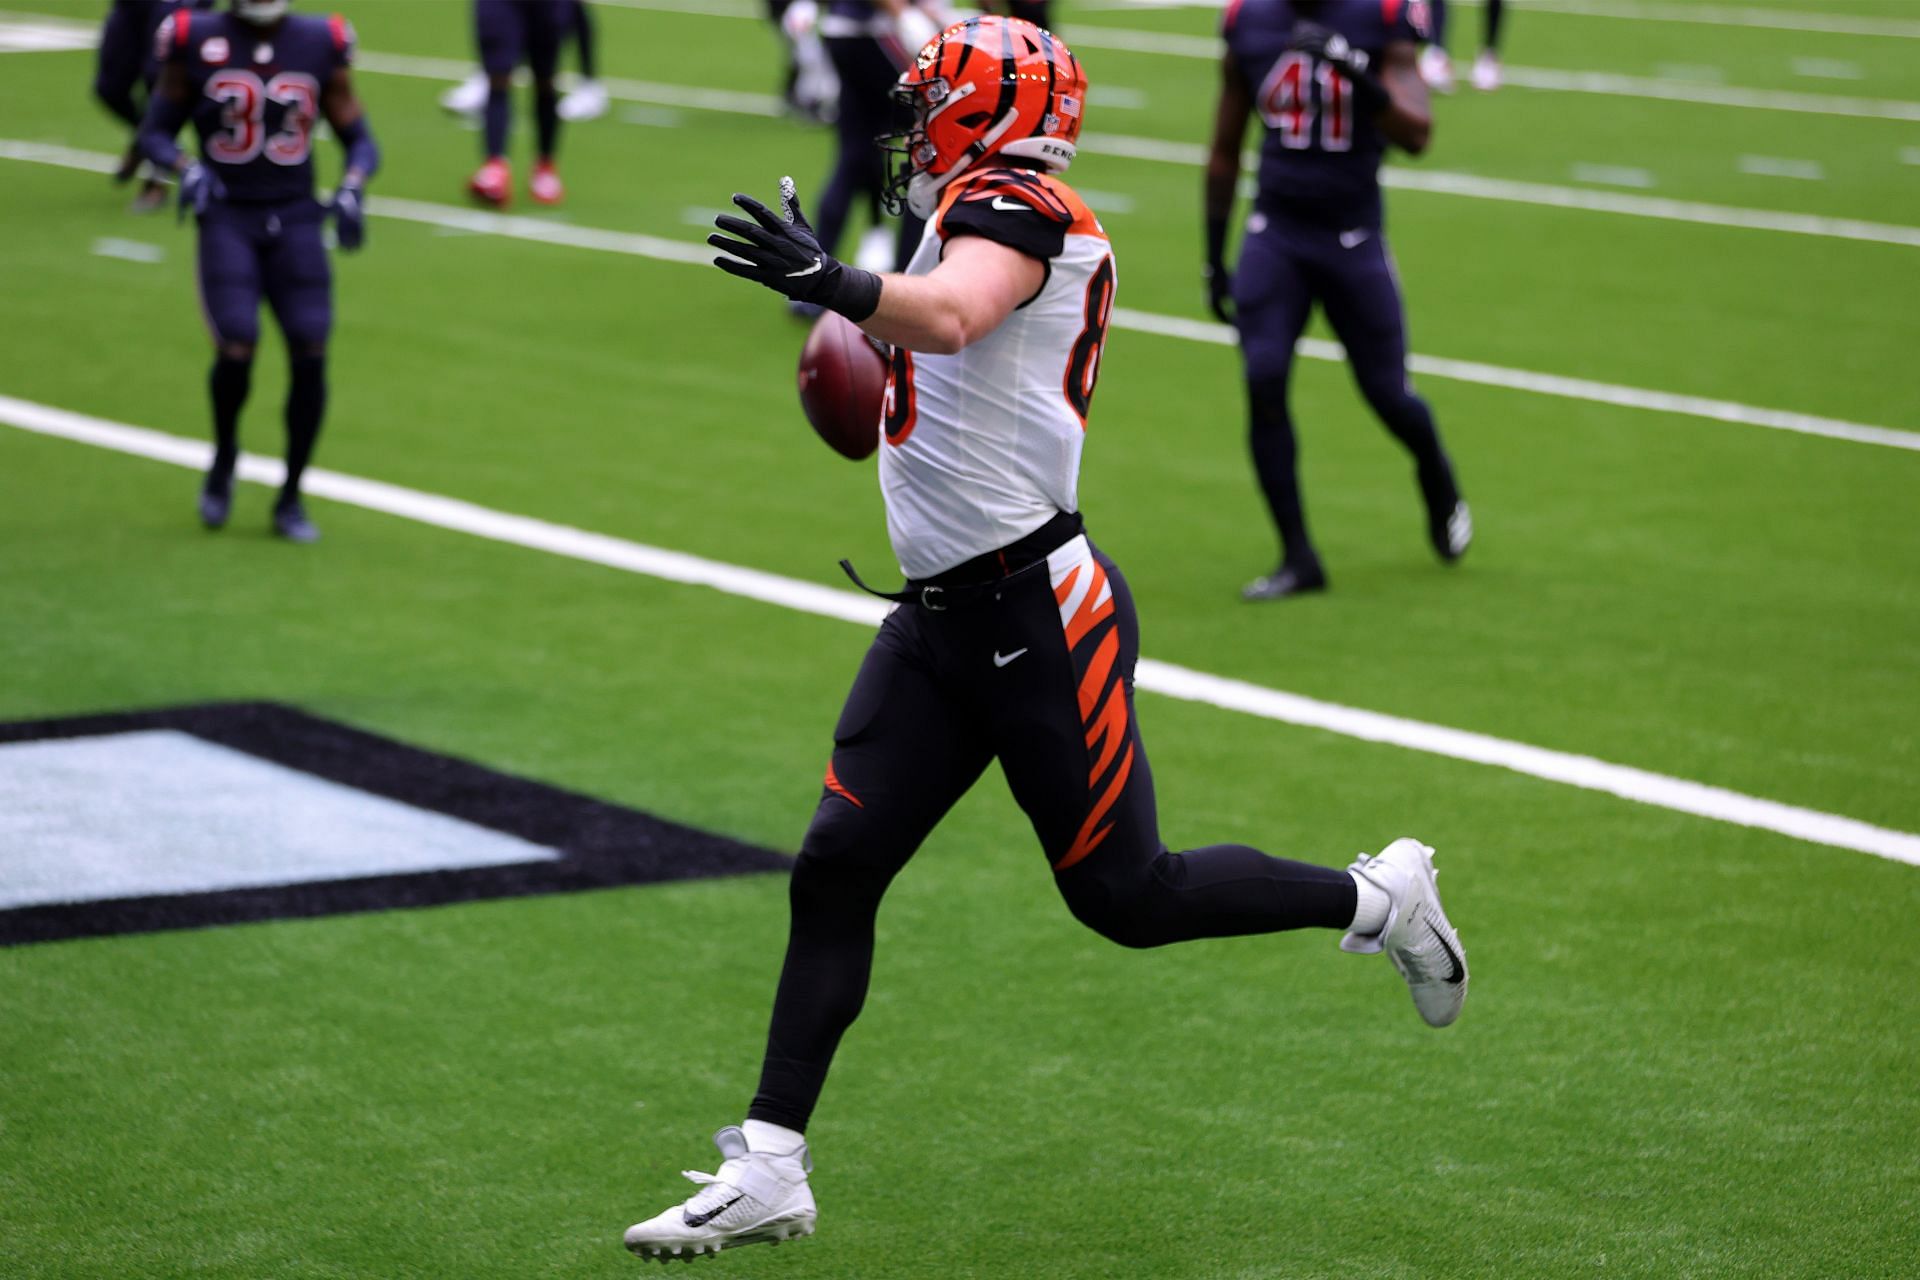 Tight end Drew Sample #89 of the Cincinnati Bengals runs in a touchdown in the first quarter of the game against the Houston Texans